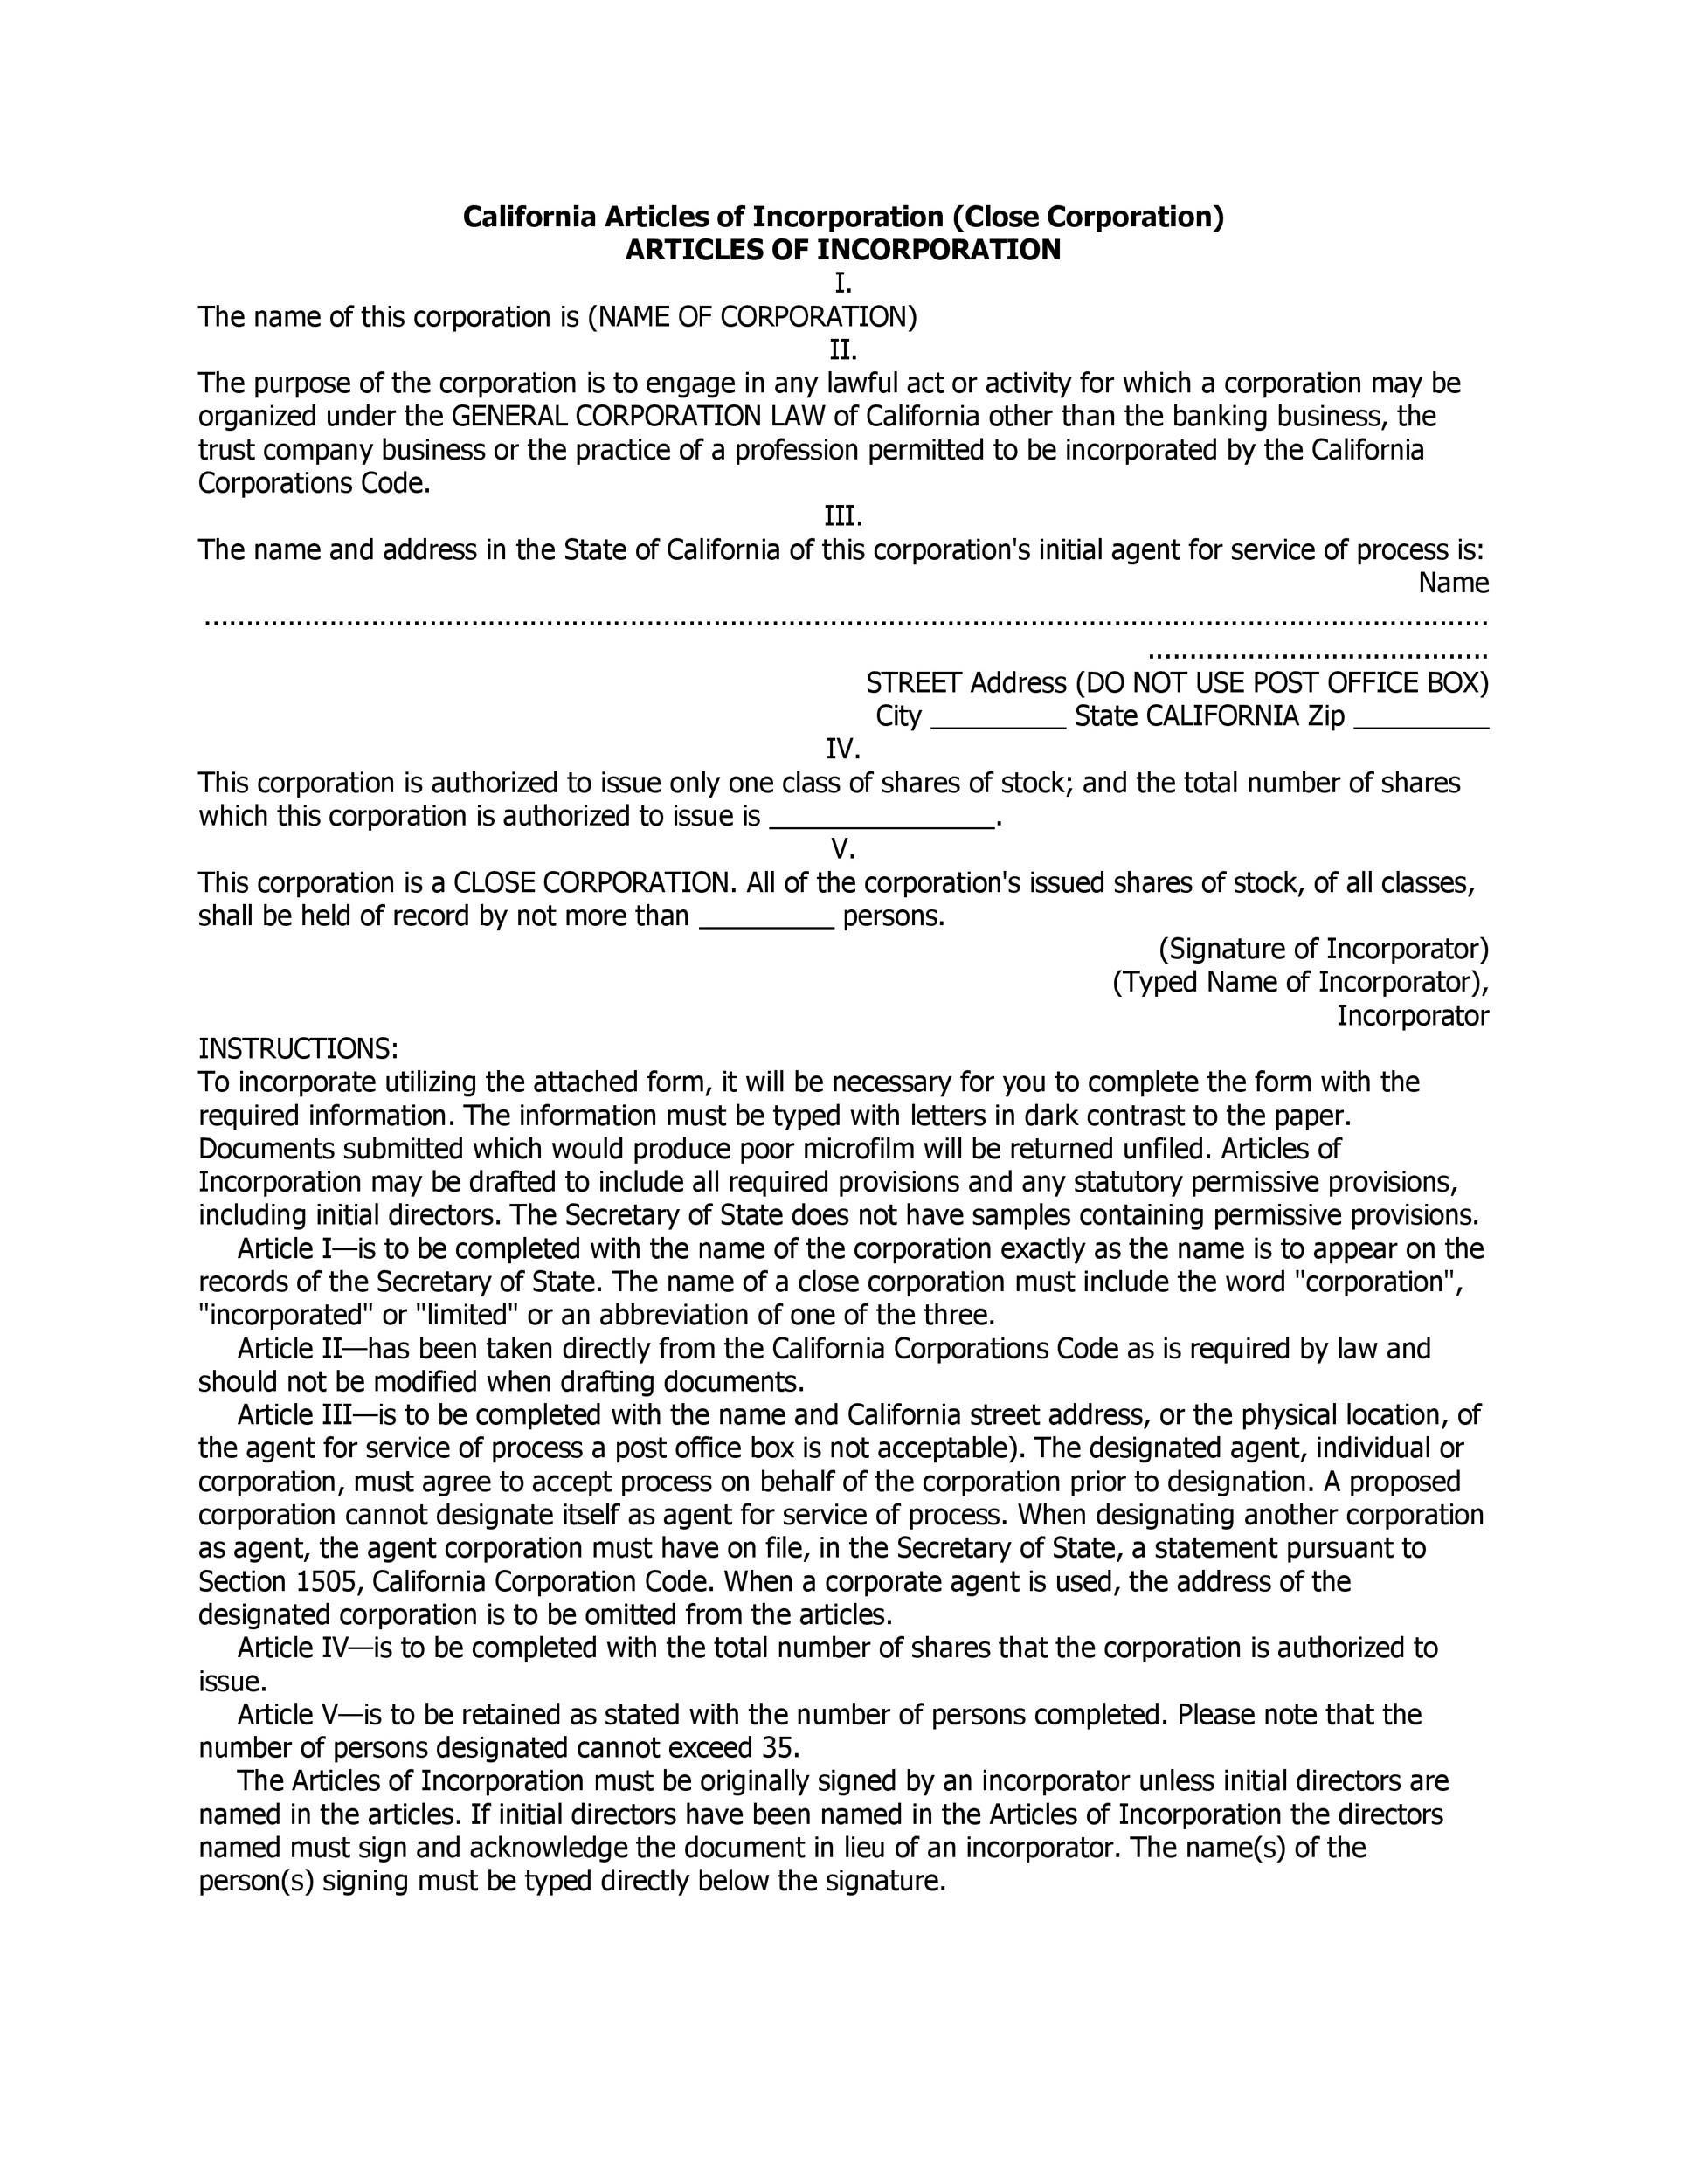 Articles of Incorporation 47 Templates for Any State ᐅ TemplateLab